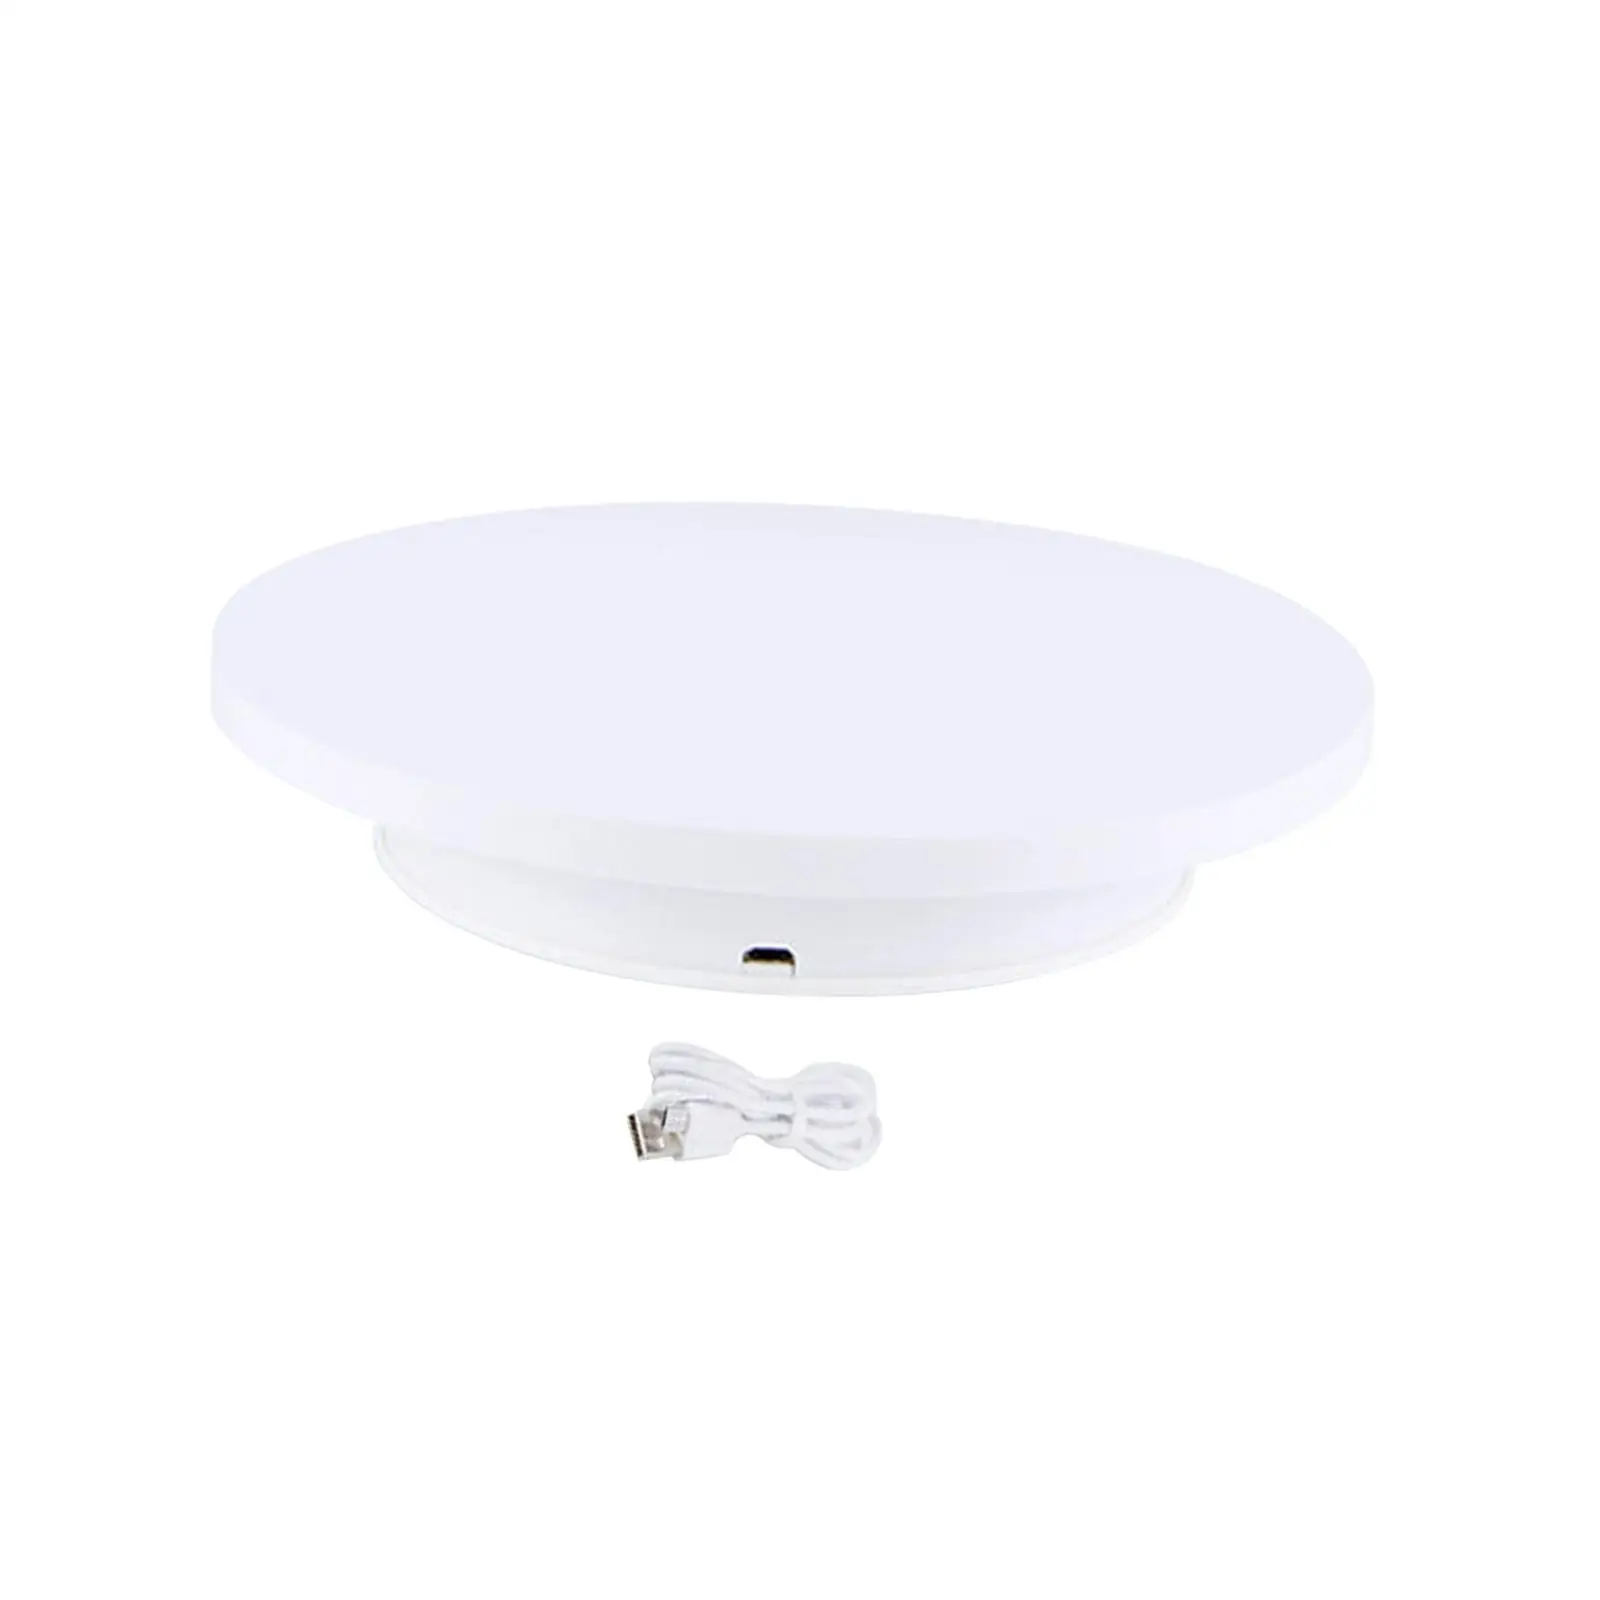 Electric Rotating Turntable Jewelry Holder 360 Degree Rotating Display for Video Shooting Photography Products Shows Cake